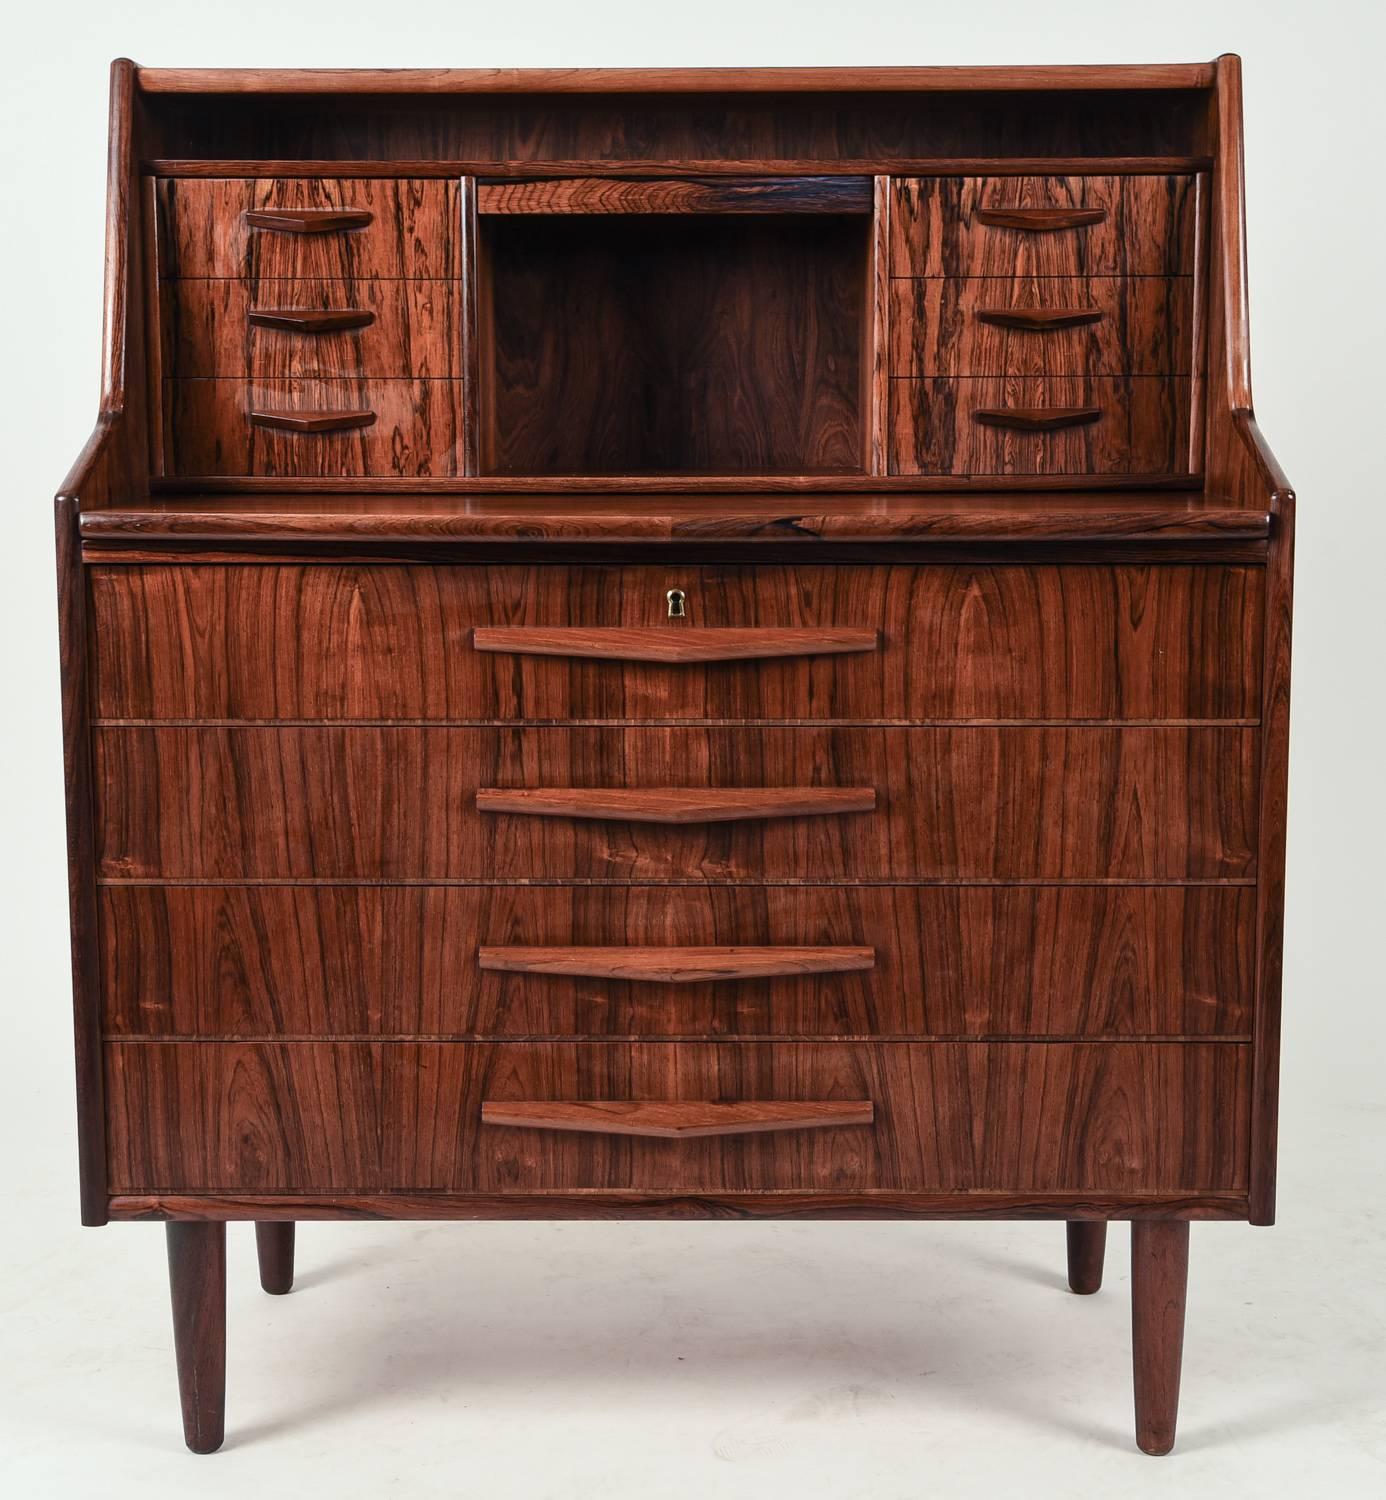 This Danish Mid-Century secretary is made of handsome rosewood and features three larger drawers on the lower half, and a niche surrounded by two sets of three drawers on the upper half. Would make a great vanity or chest for a bedroom, or could be